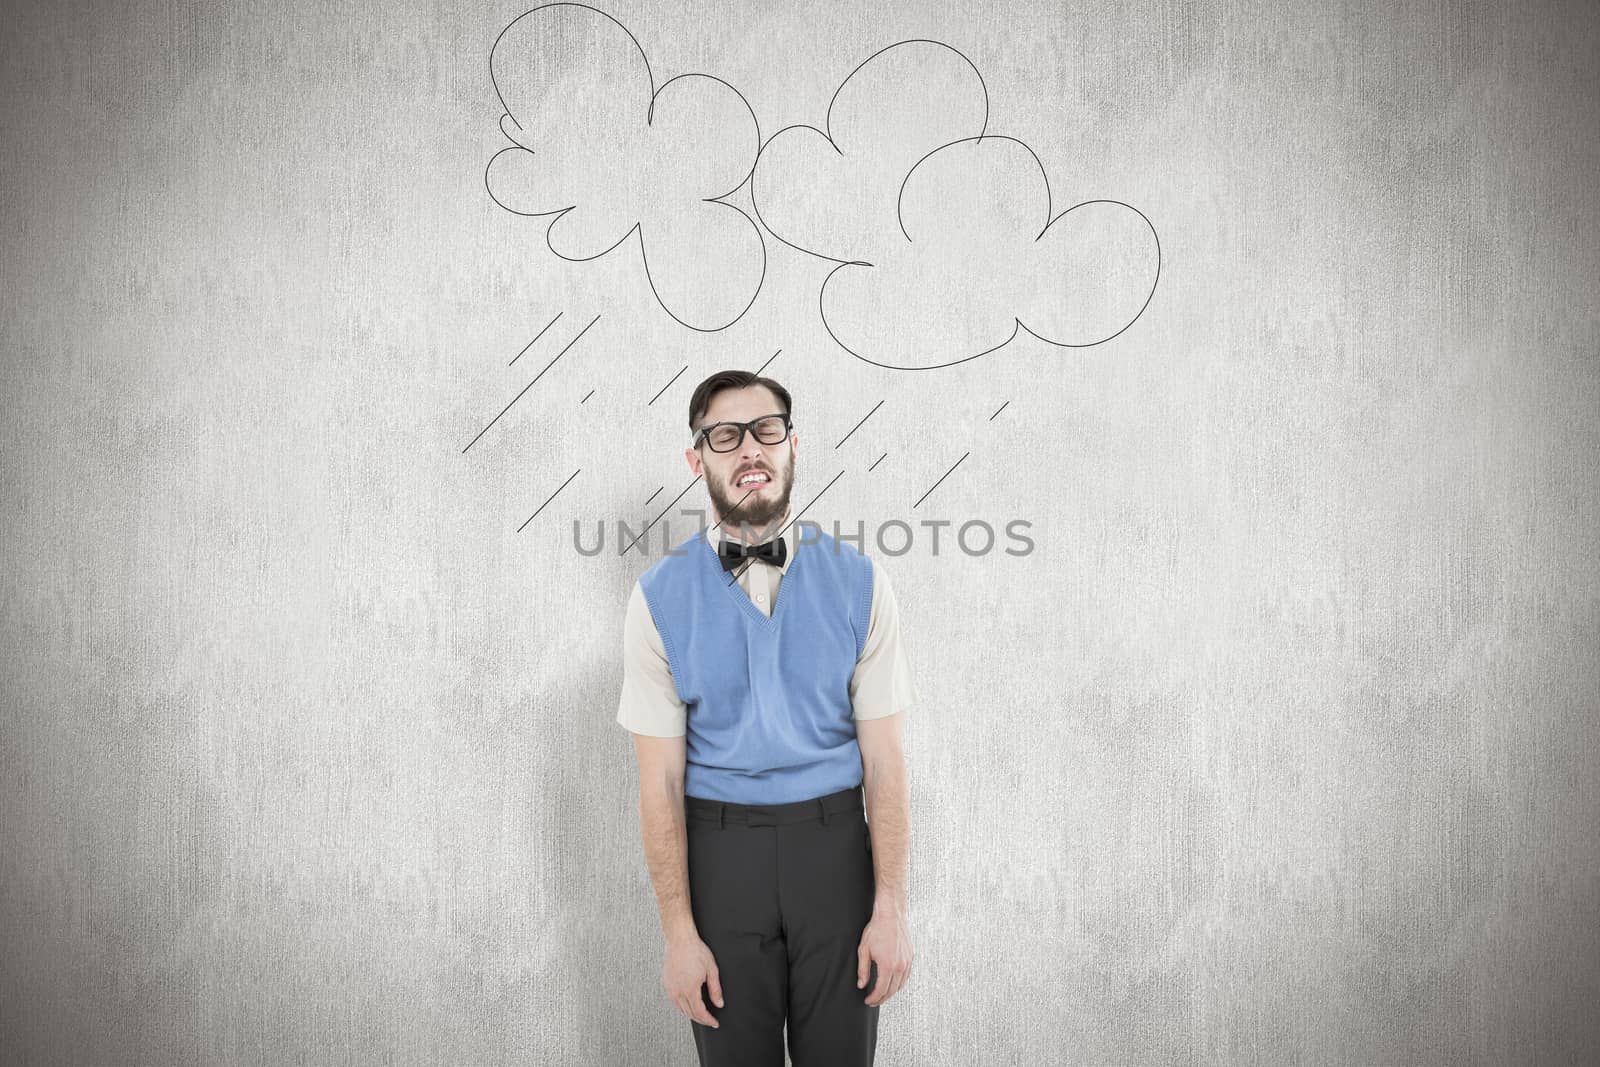 Geeky hipster pulling a silly face against white background